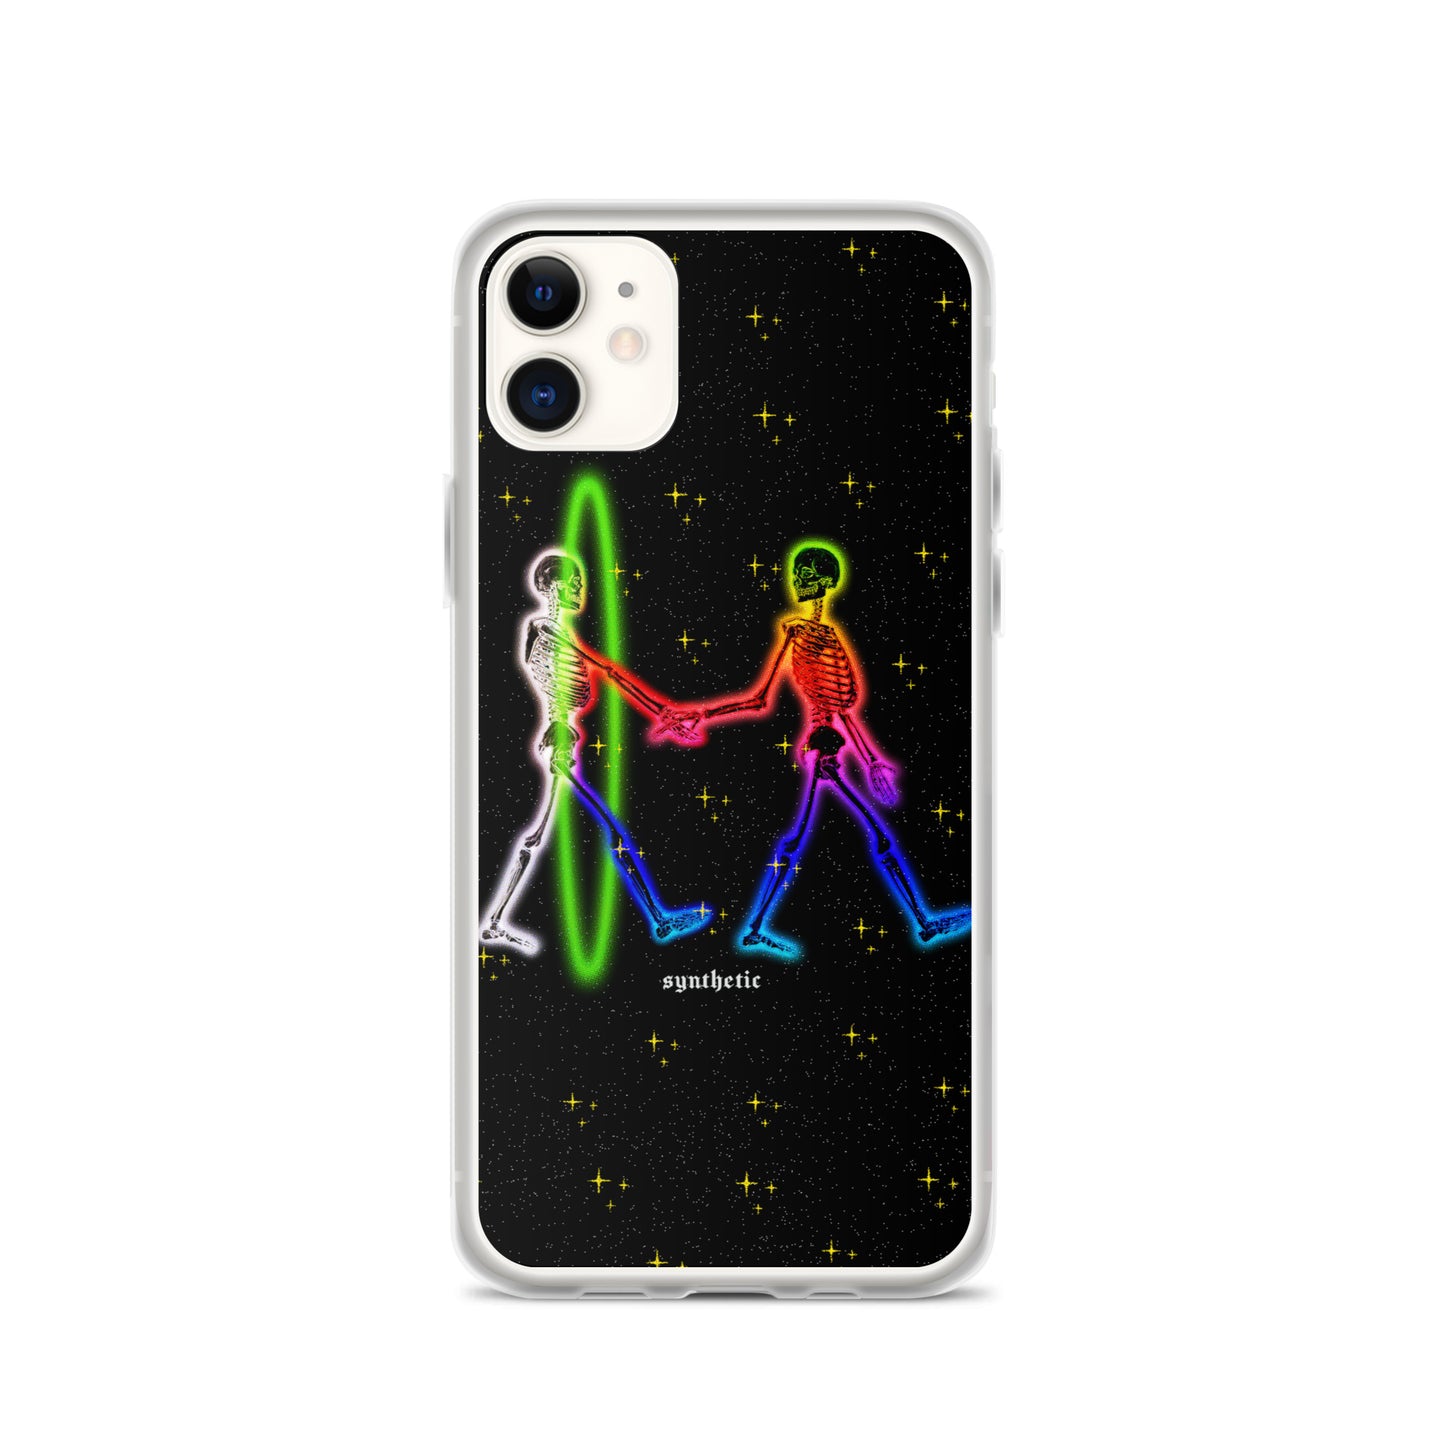 'you pulled me out of the dark' iphone case